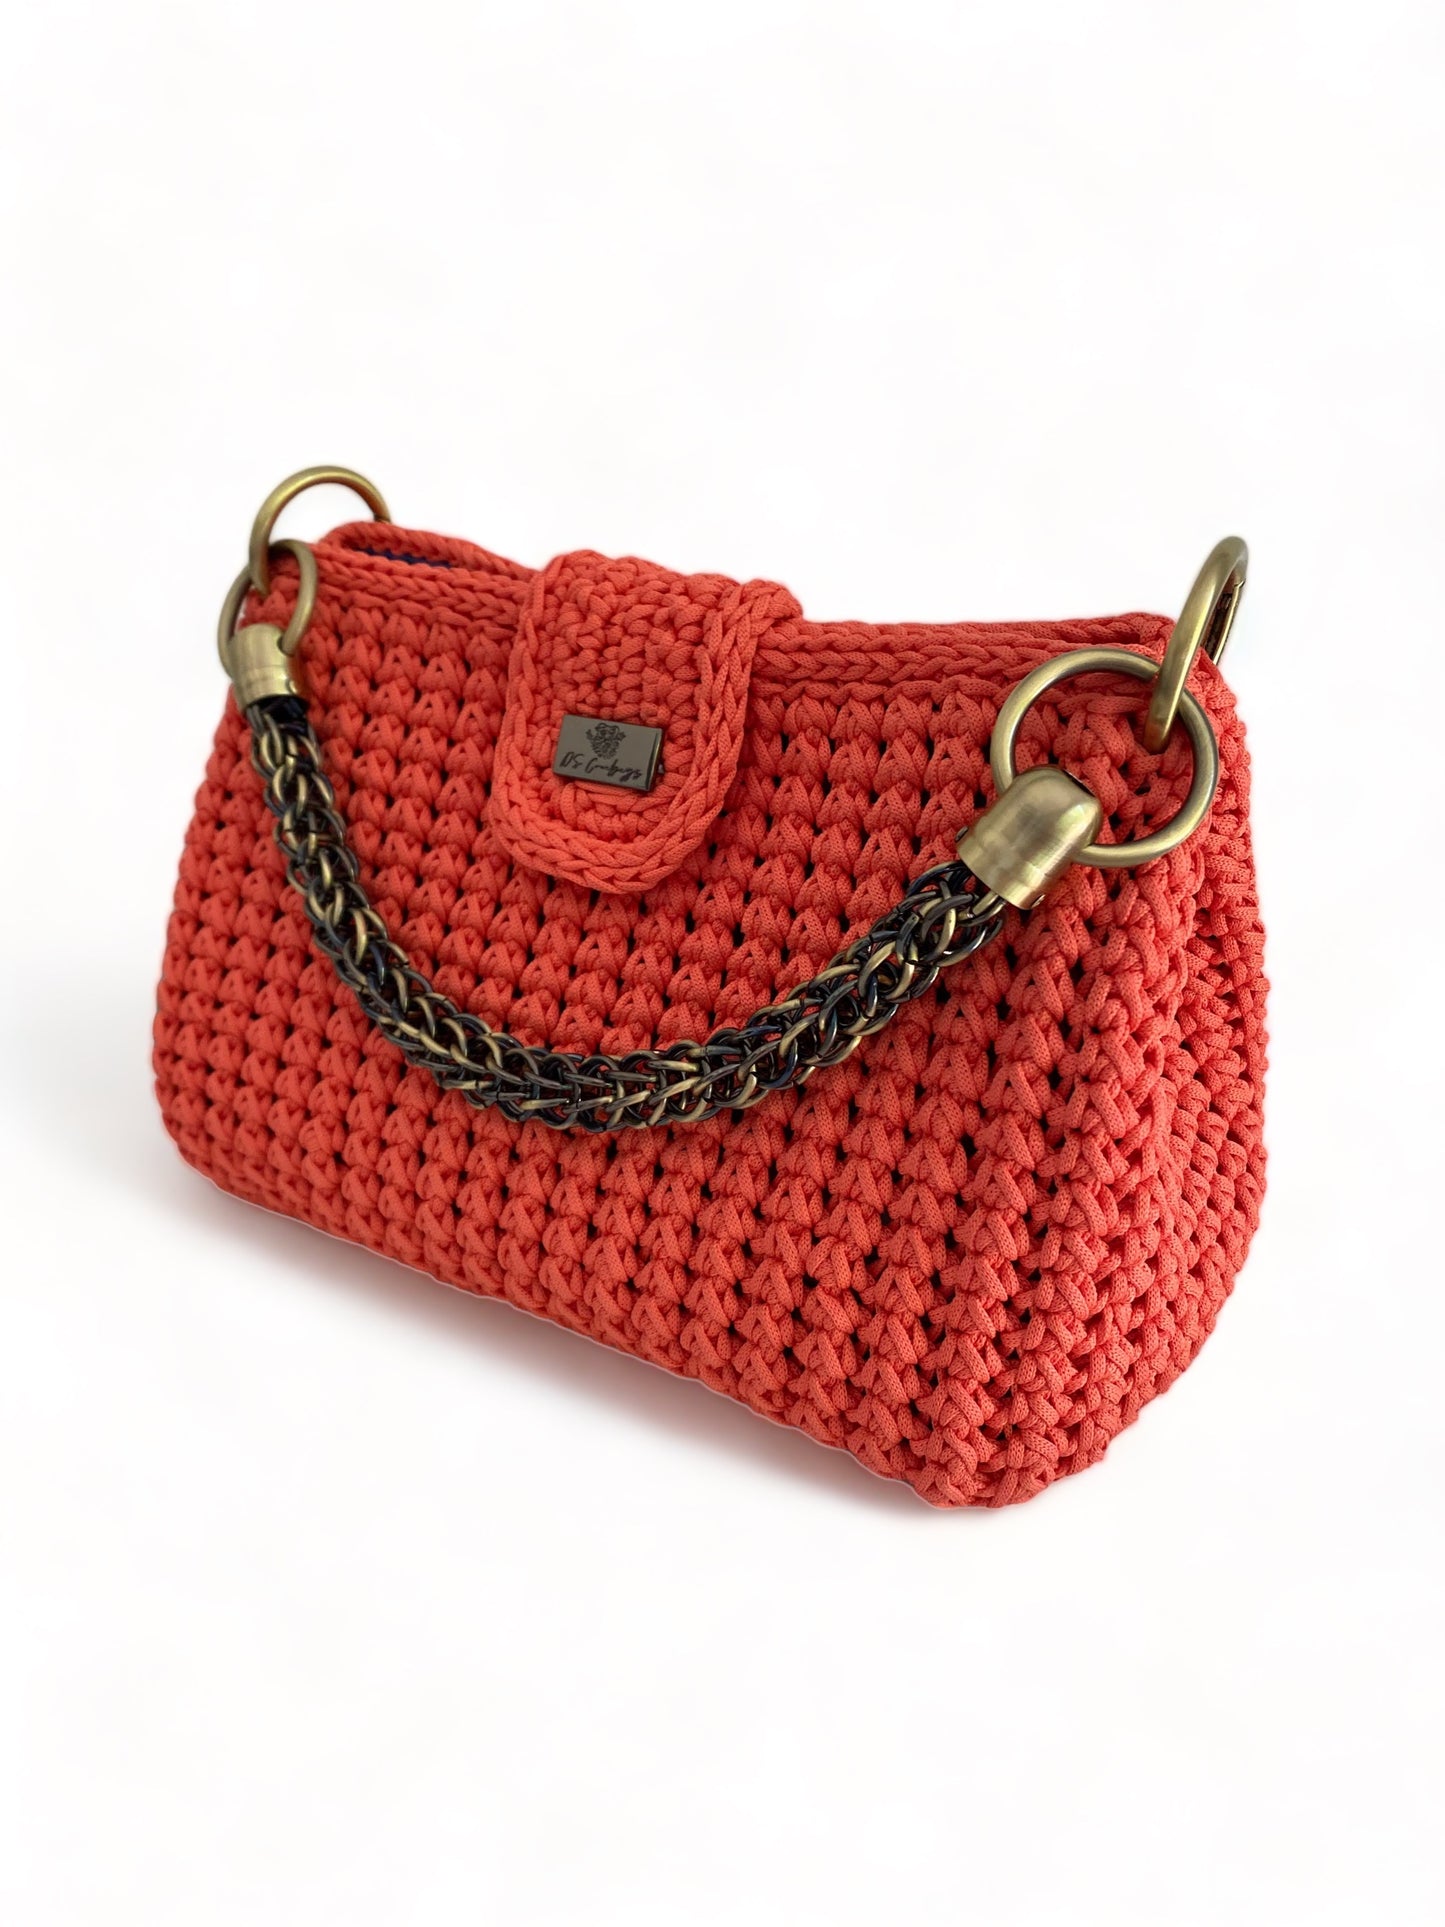 CLUTCH - your summer glam in Coral Orange colour